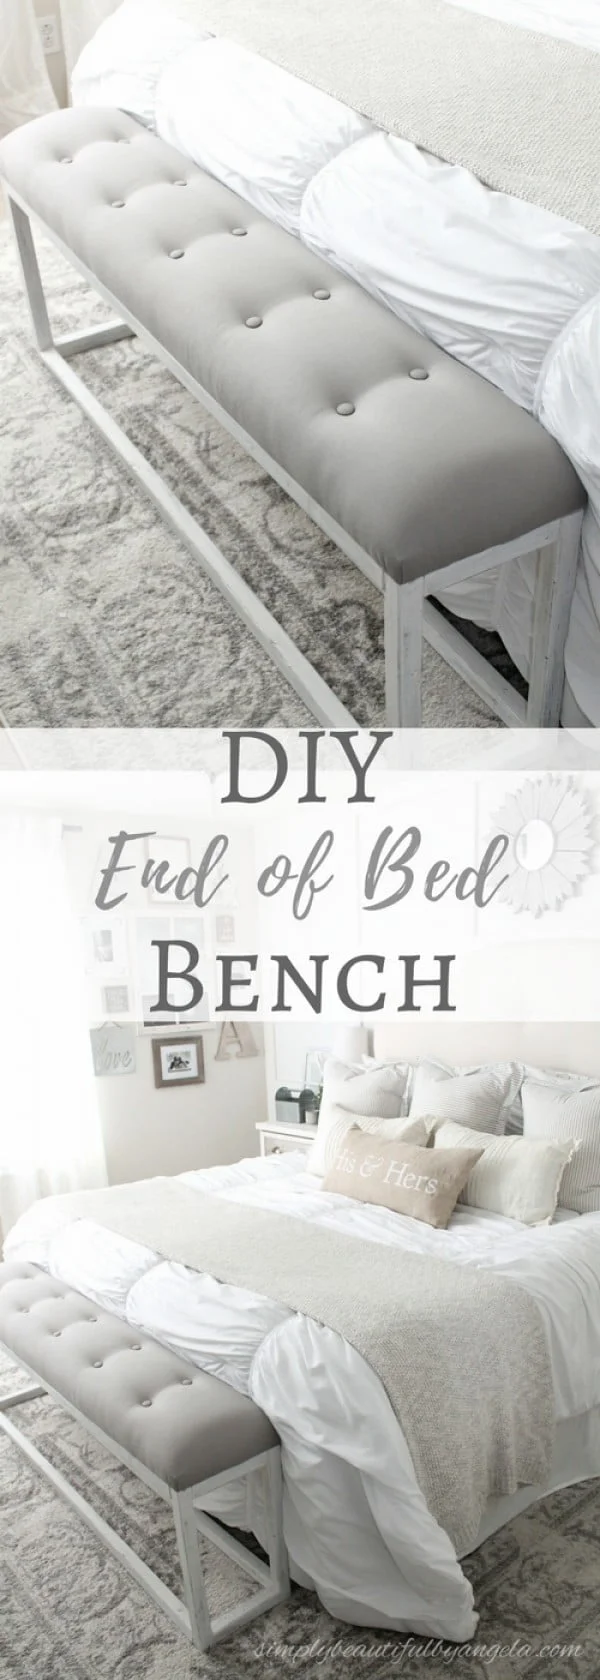 Check out the tutorial on how to make an easy DIY bed end bench